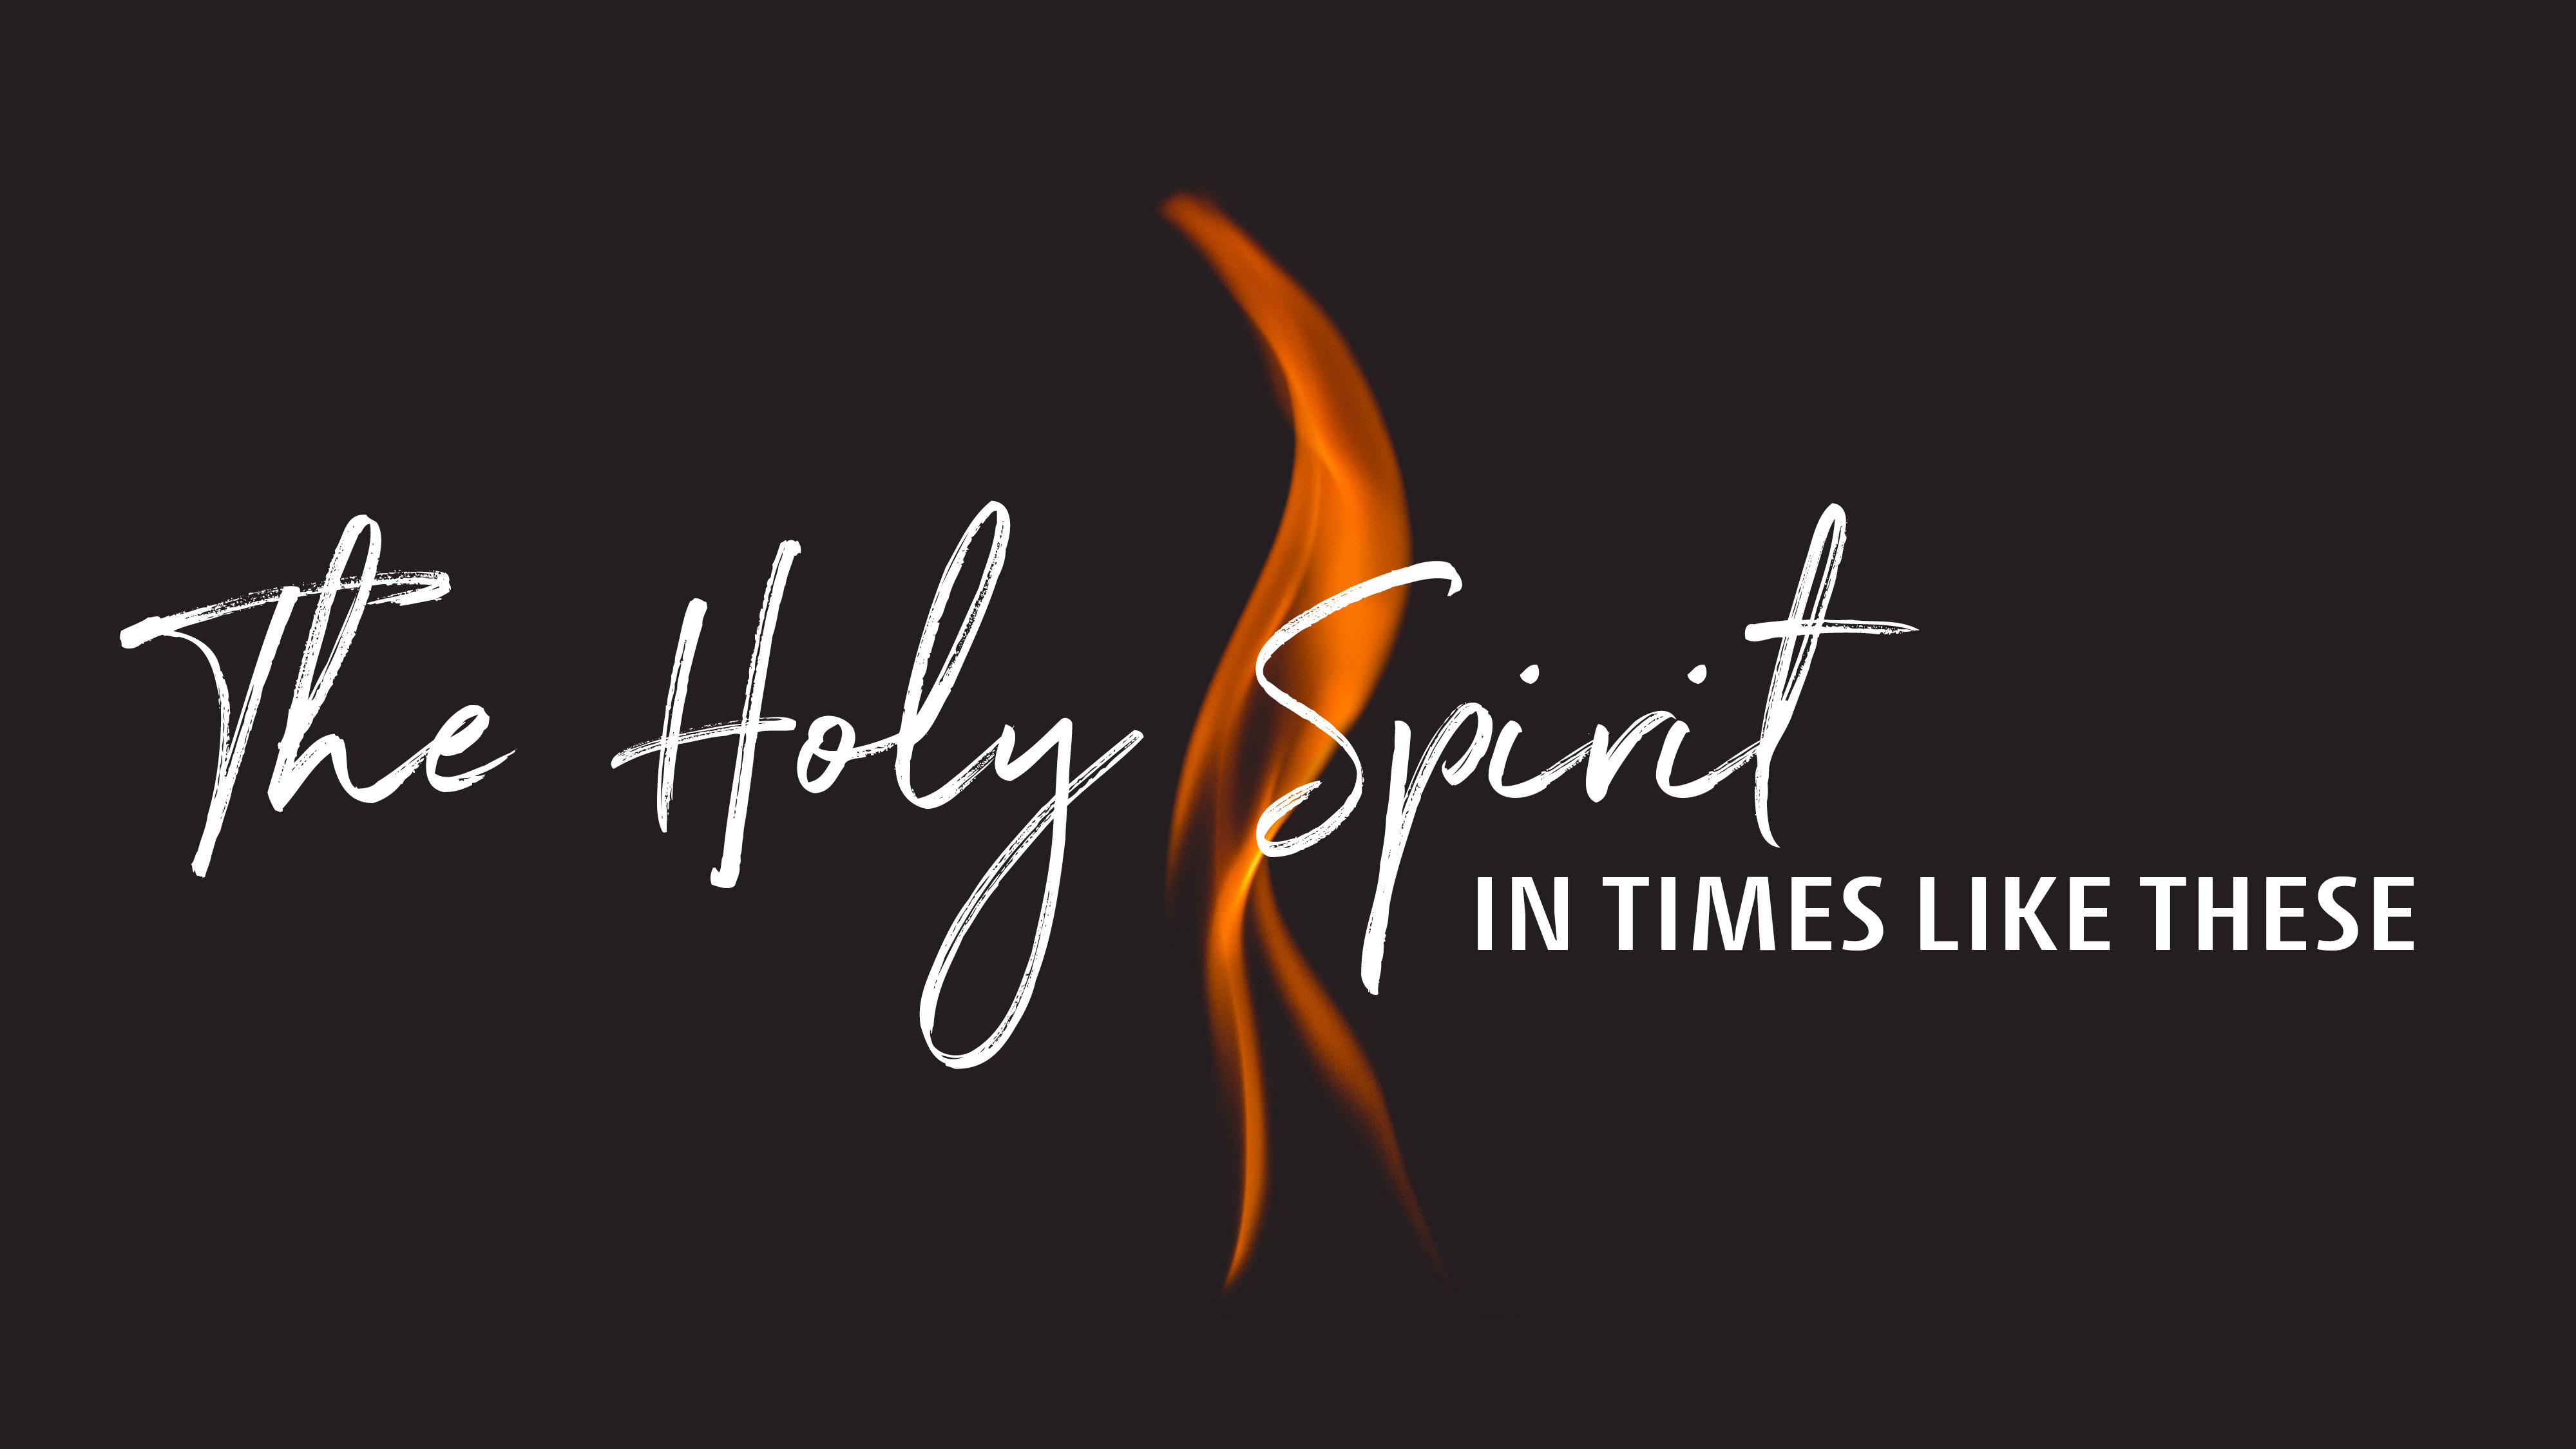 The Holy Spirit In Times Like These banner